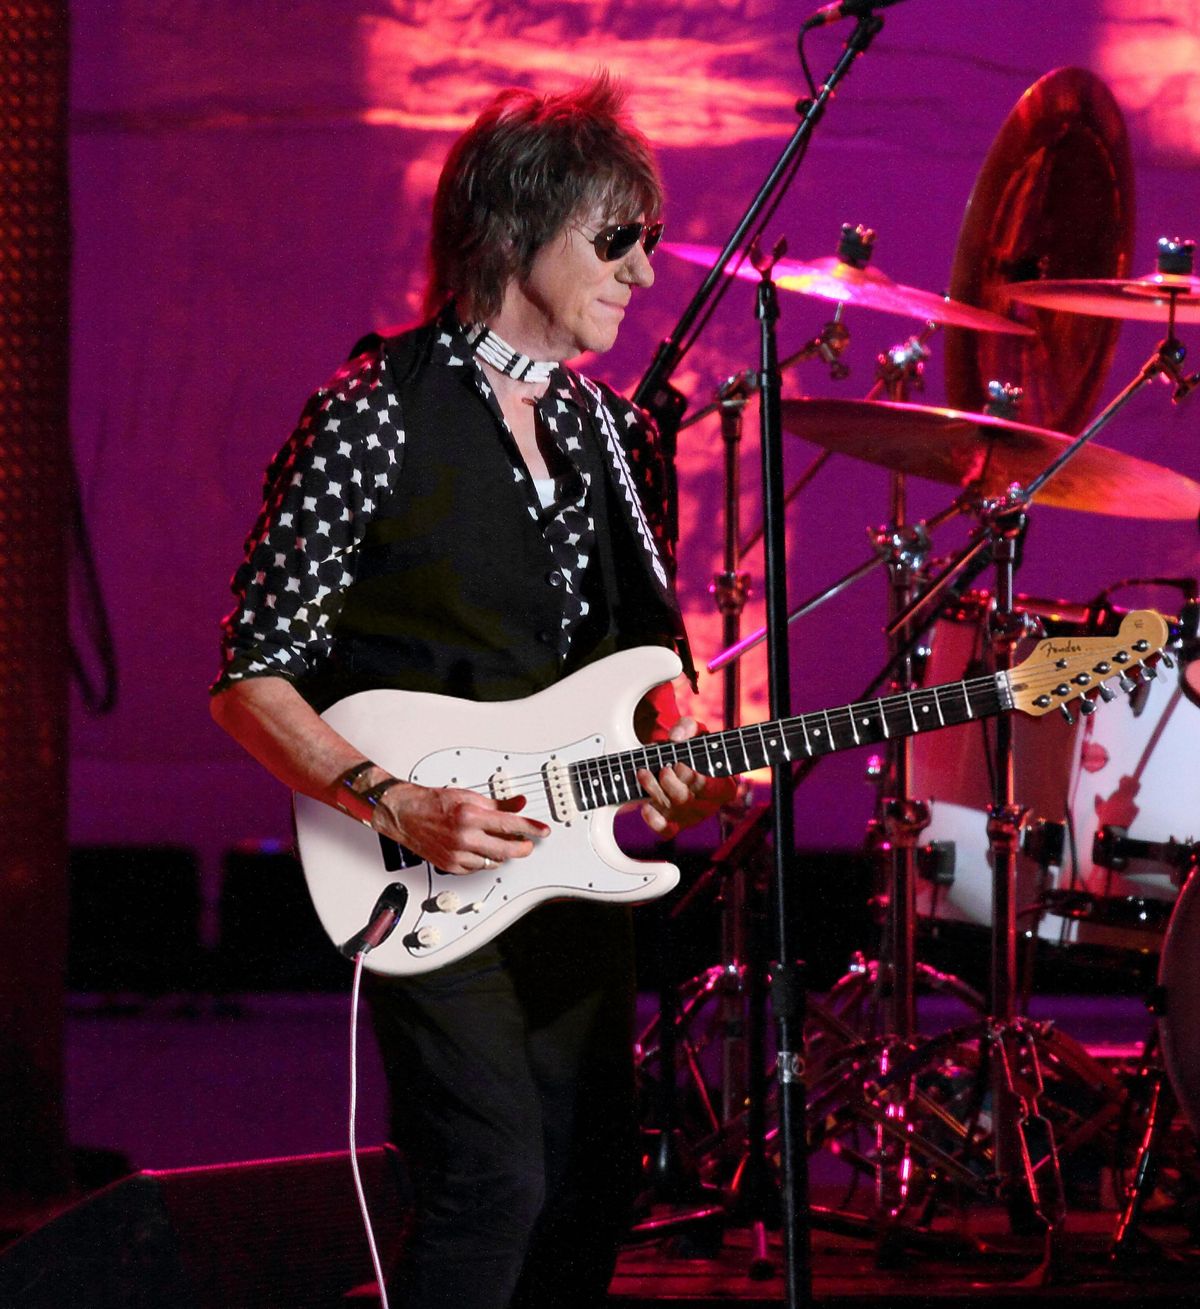 Jeff Beck Has Died at 78